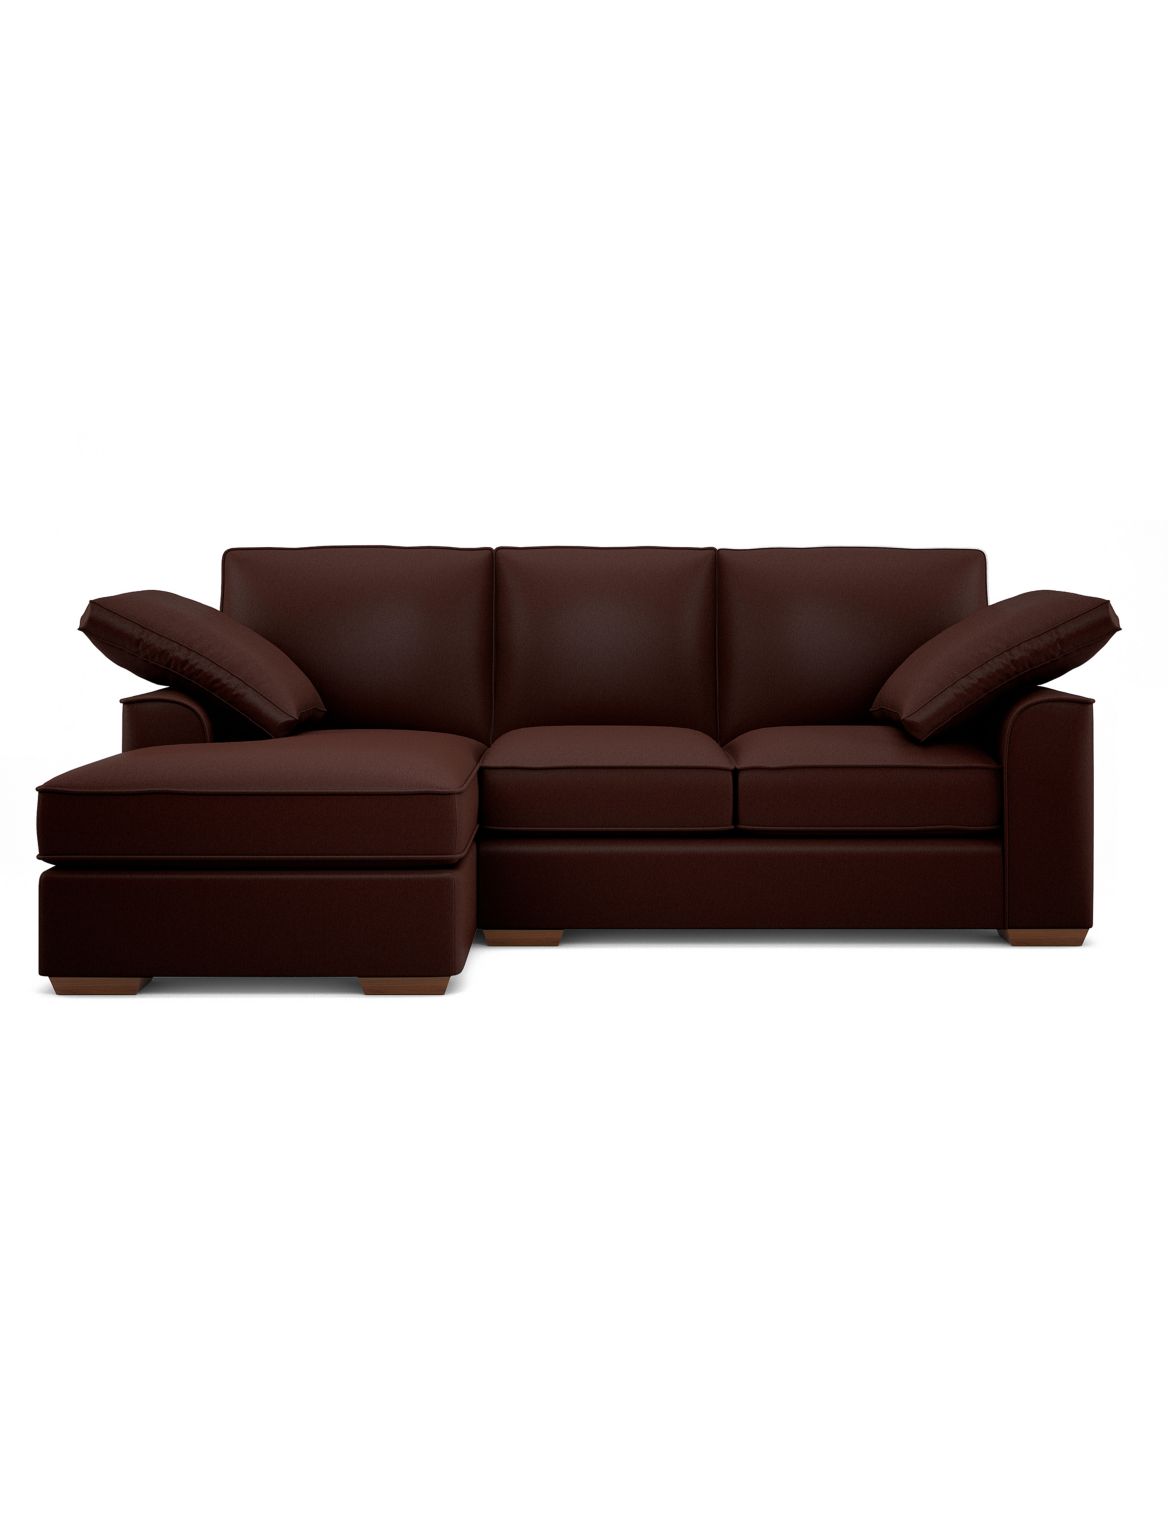 Nantucket 3 Seater Chaise (Left-Hand) brown